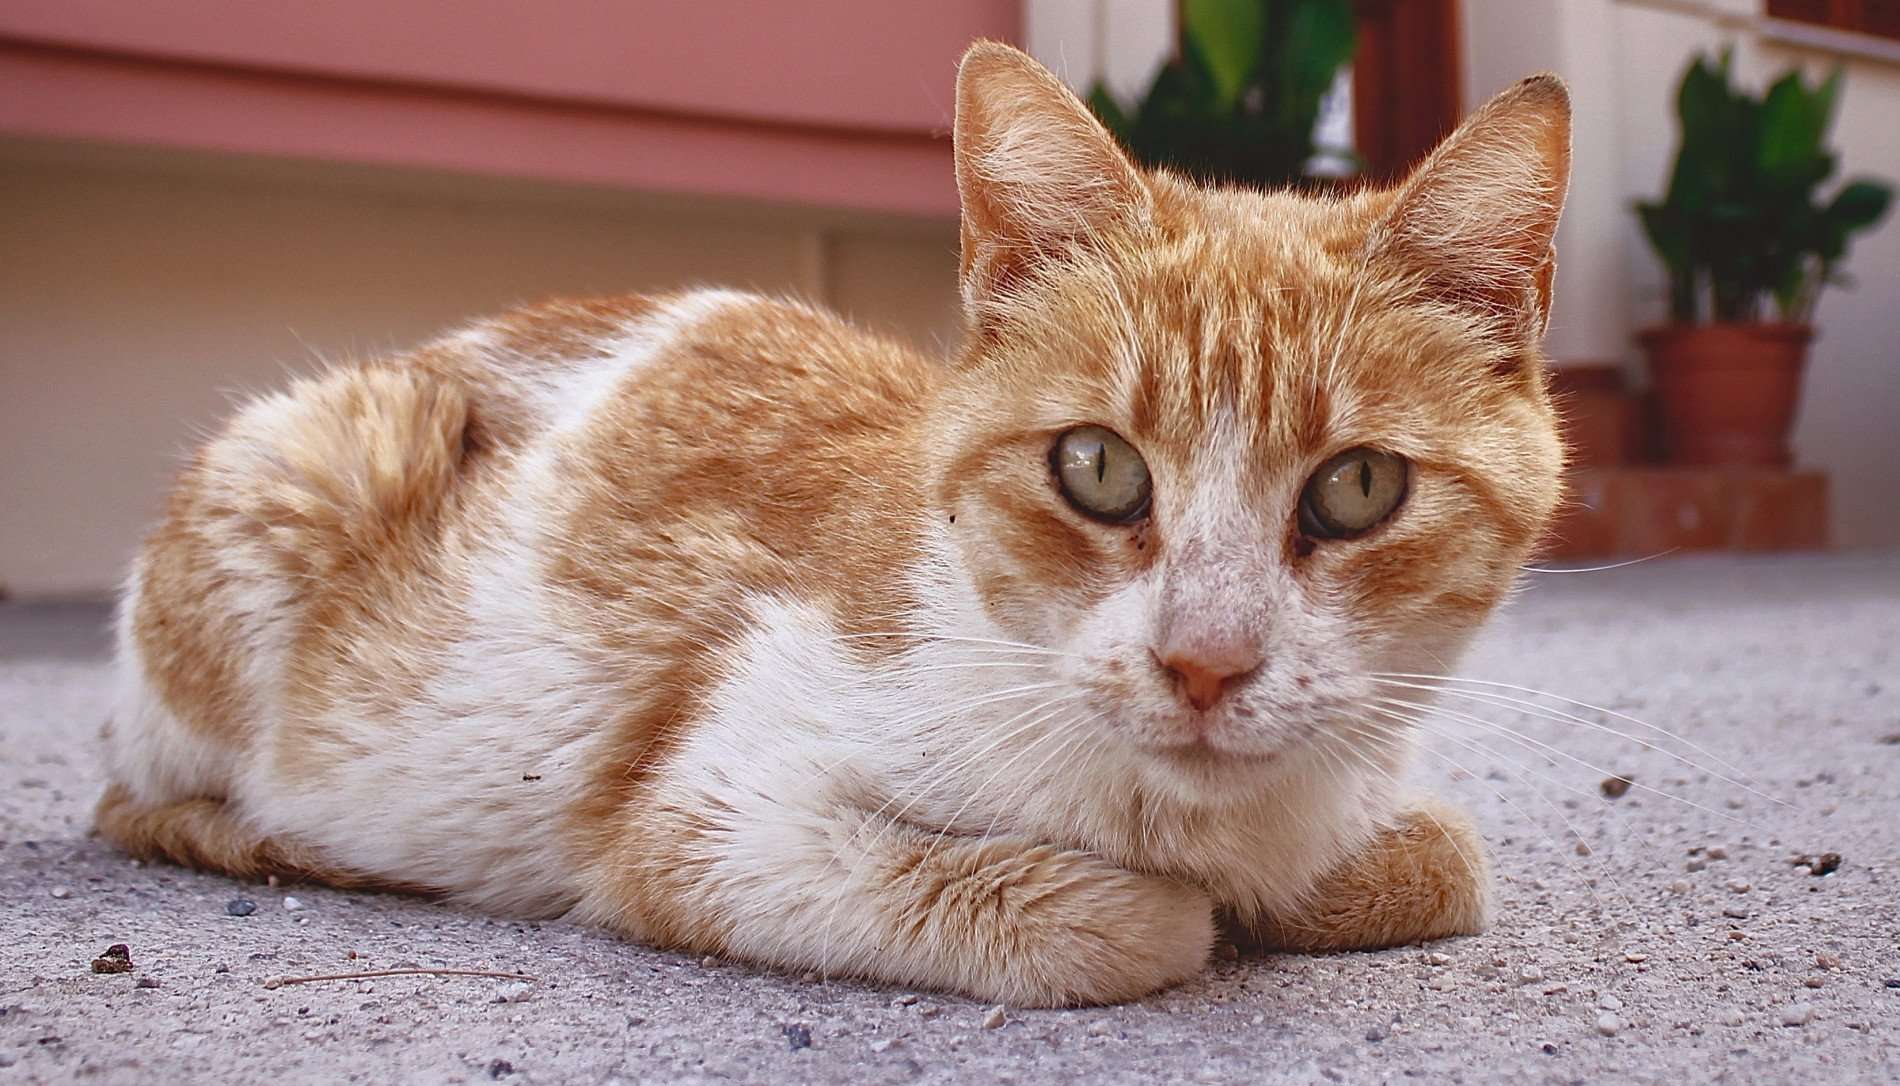 How Can I Tell If a Stray Cat is Pregnant?